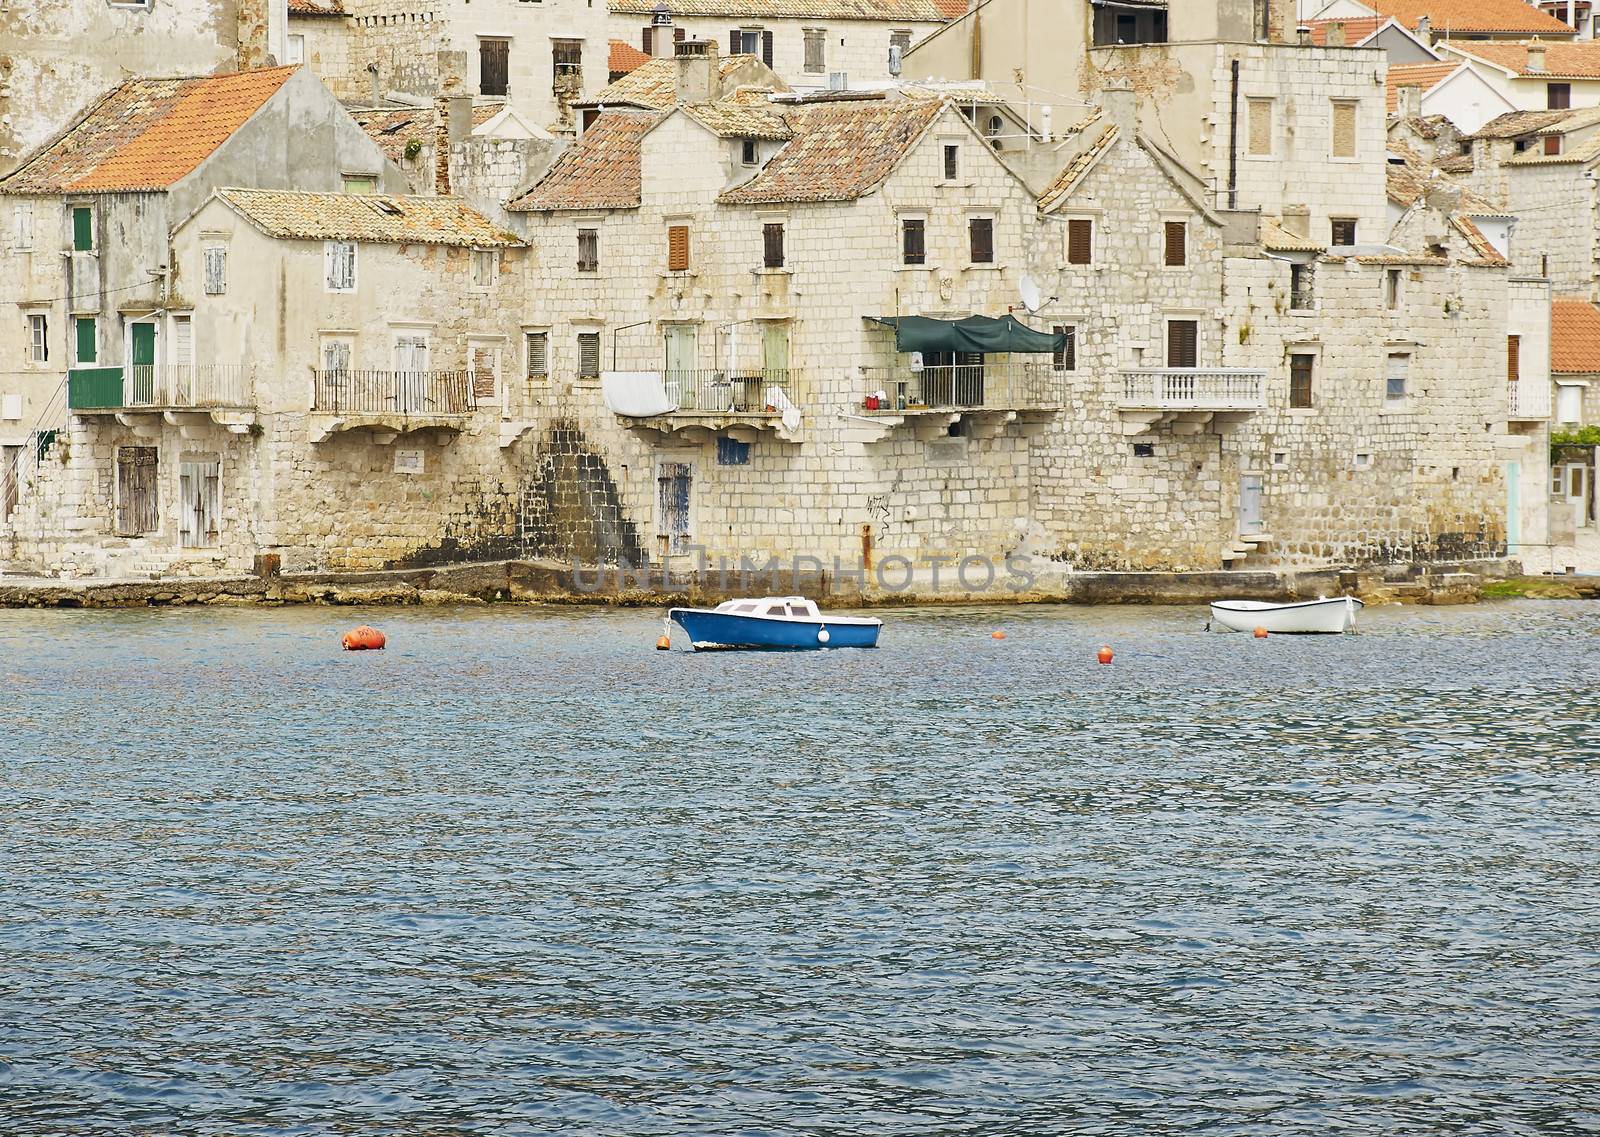 Part of the Кomiza coastal town on the island of Vis in Croatia